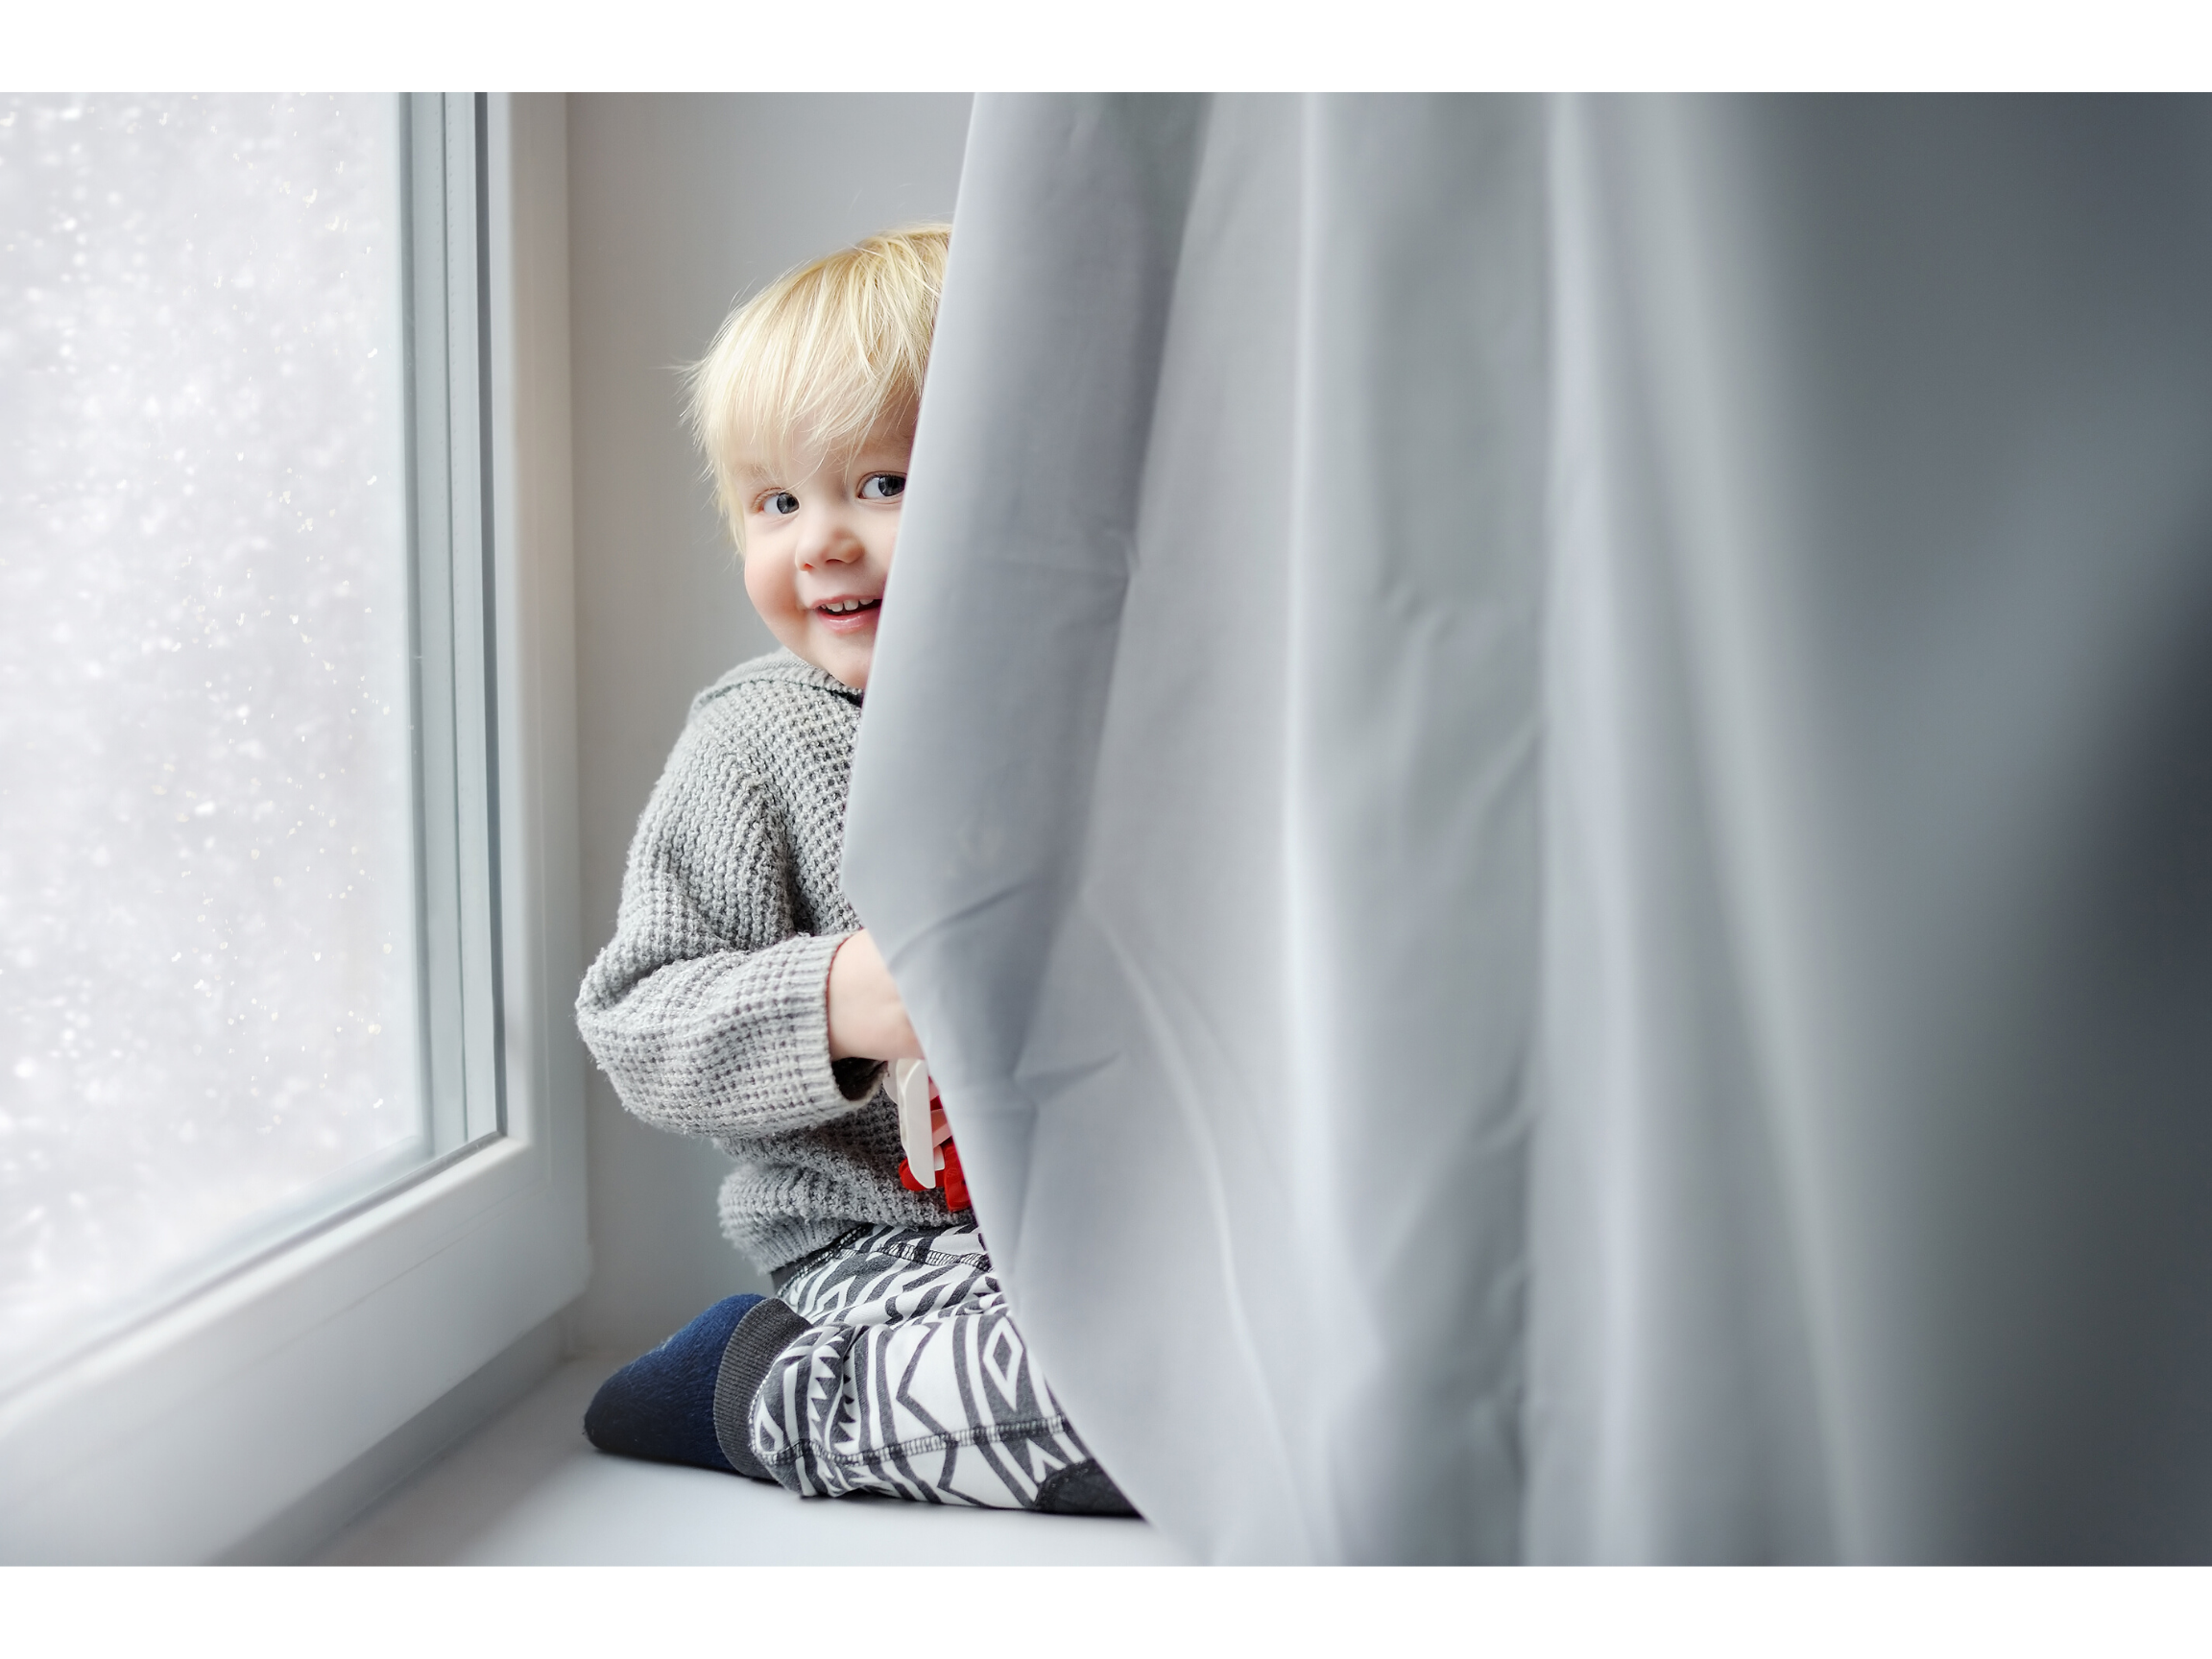 Blonde child playing behind a grey curtain preparing to return to his nursery during the COVID-19 pandemic